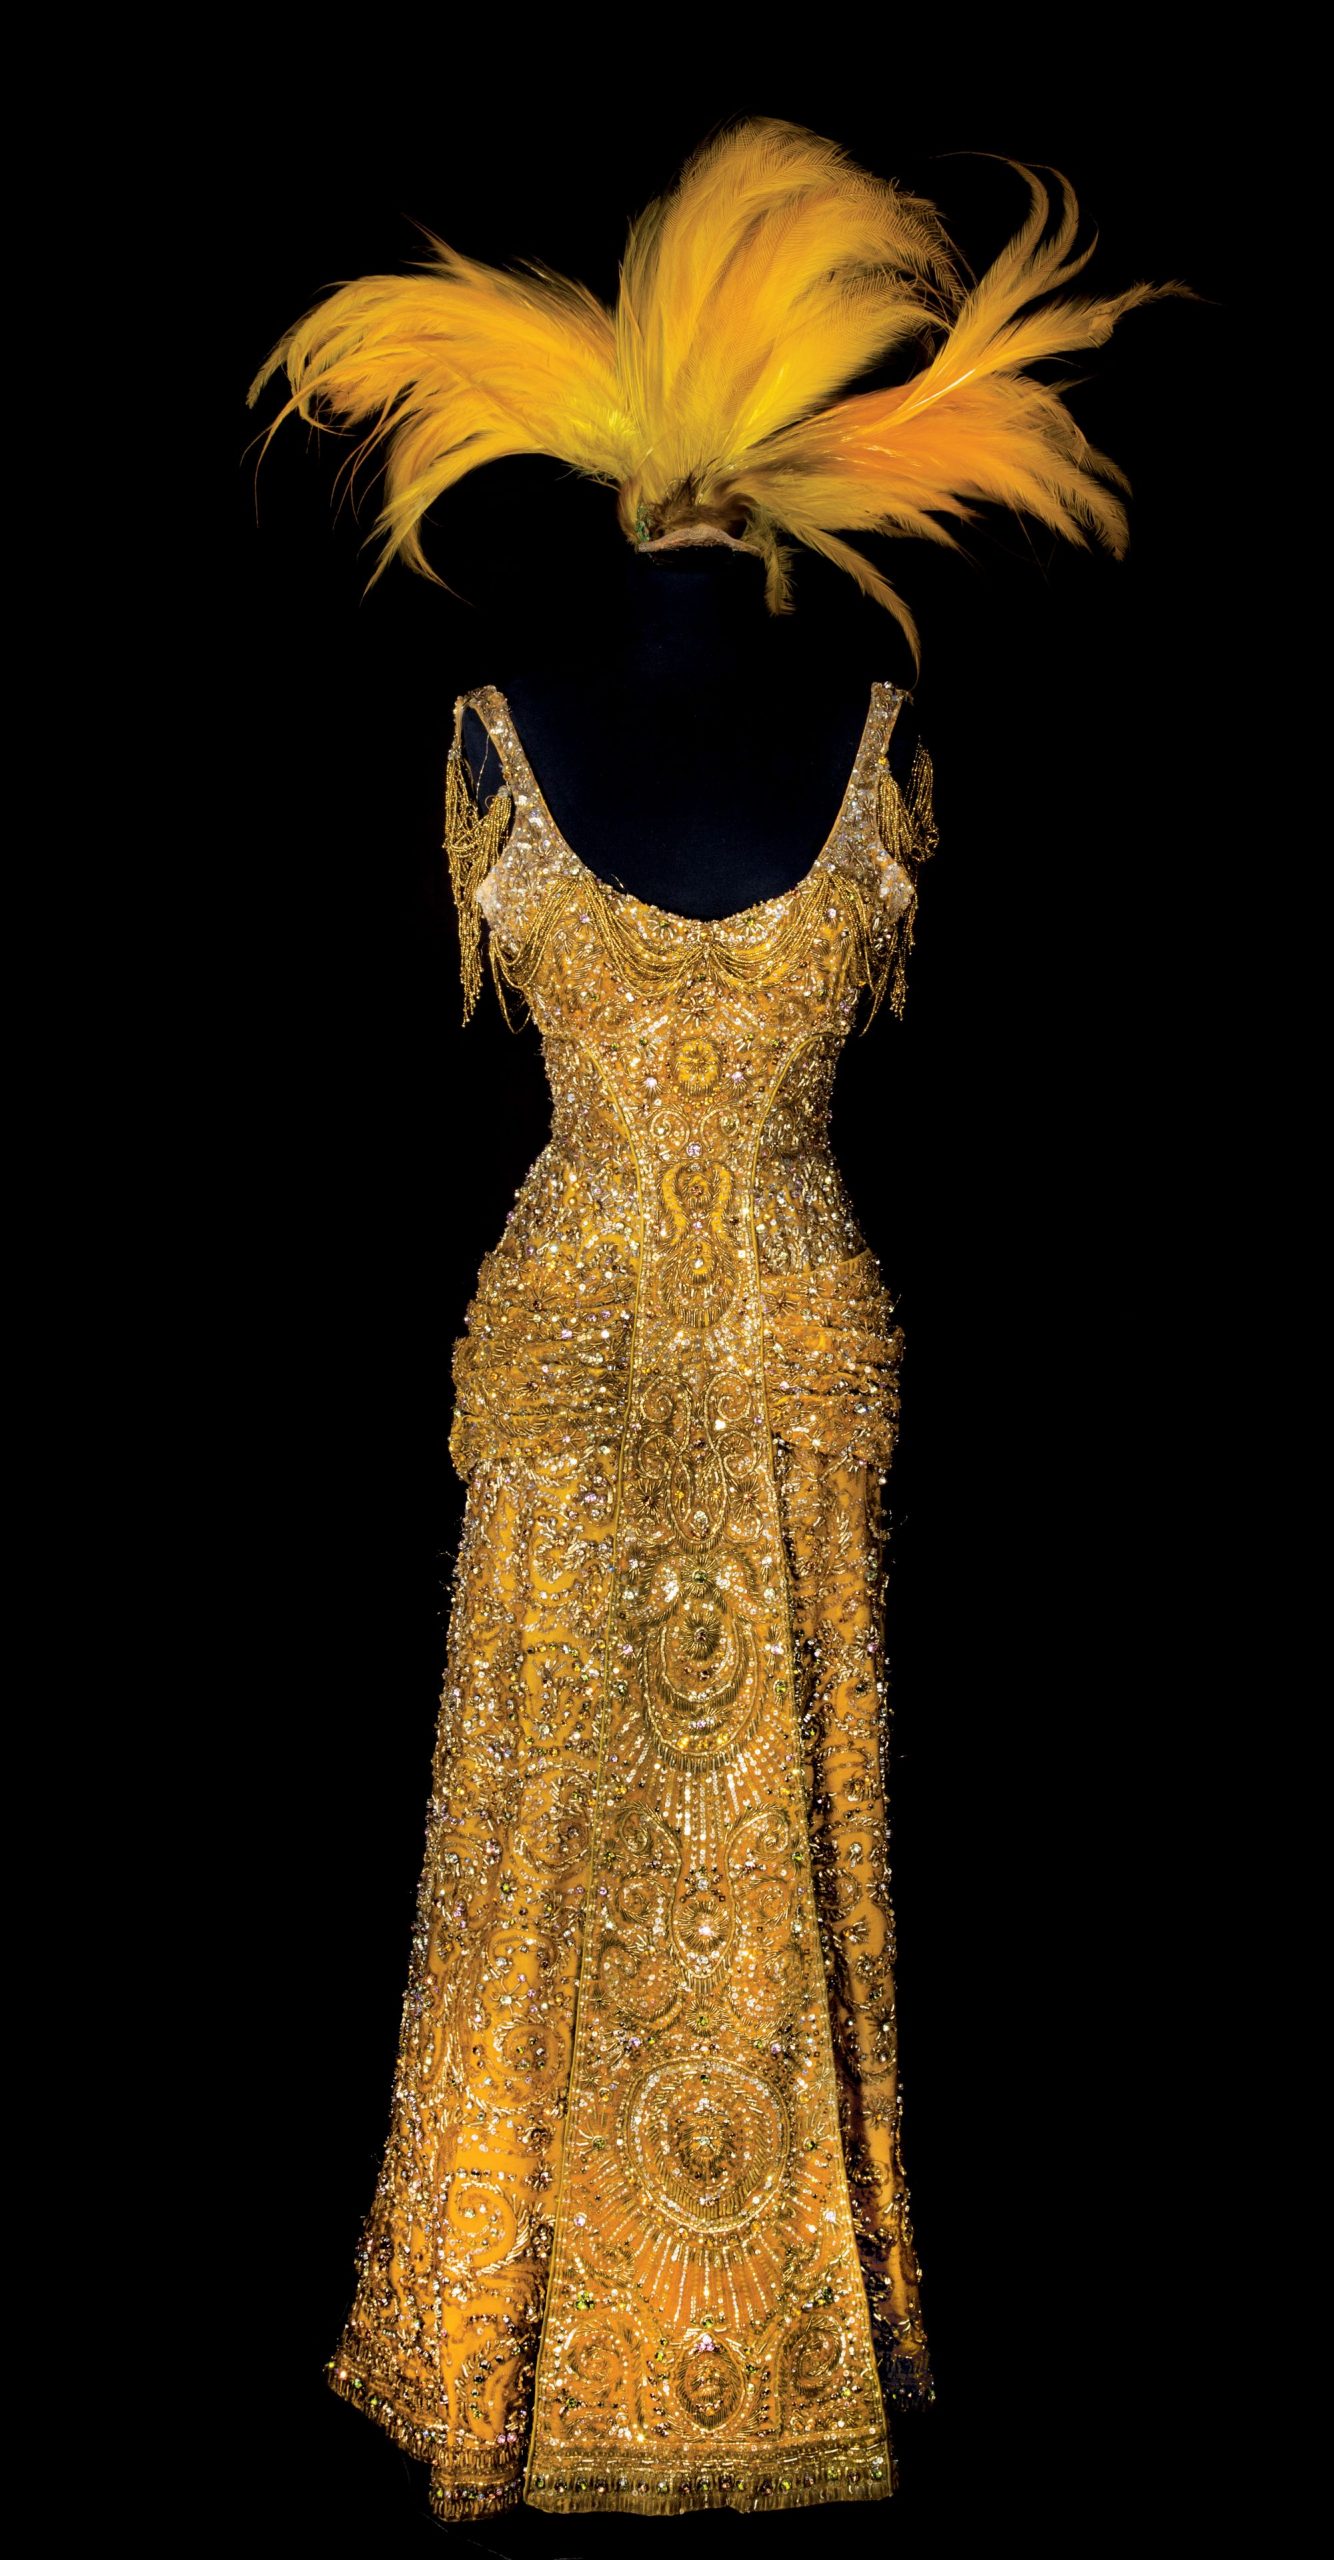 Barbra Streisand's gown from the 1969 classic Hello,Dolly |Photo: mailchimp